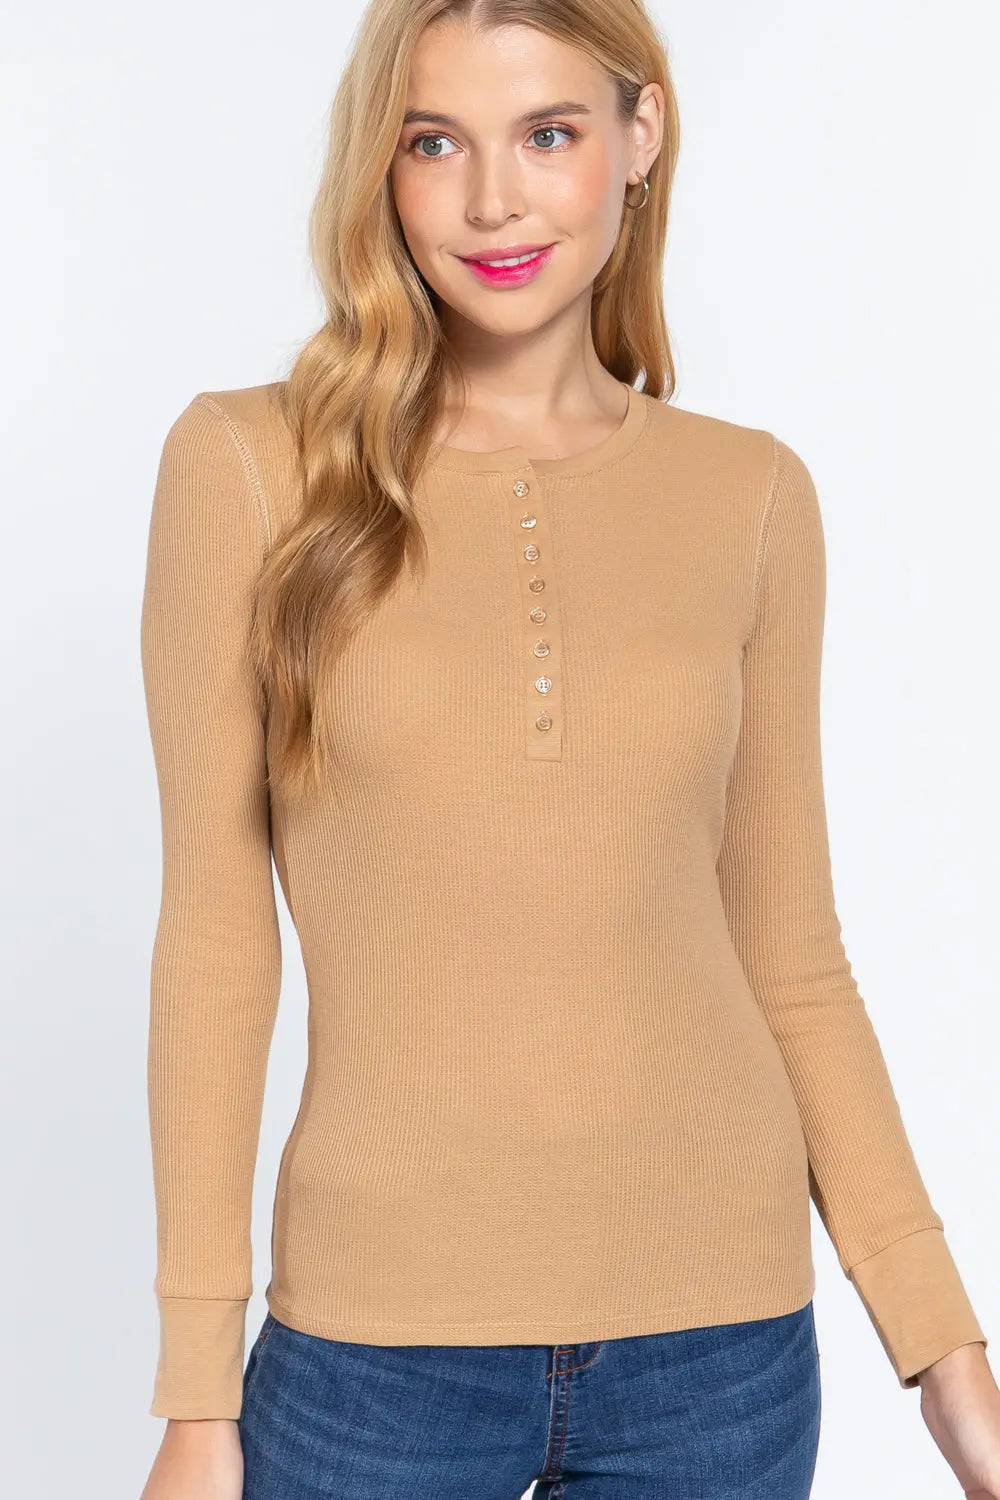 Long Slv Henley Thermal Top Sunny EvE Fashion